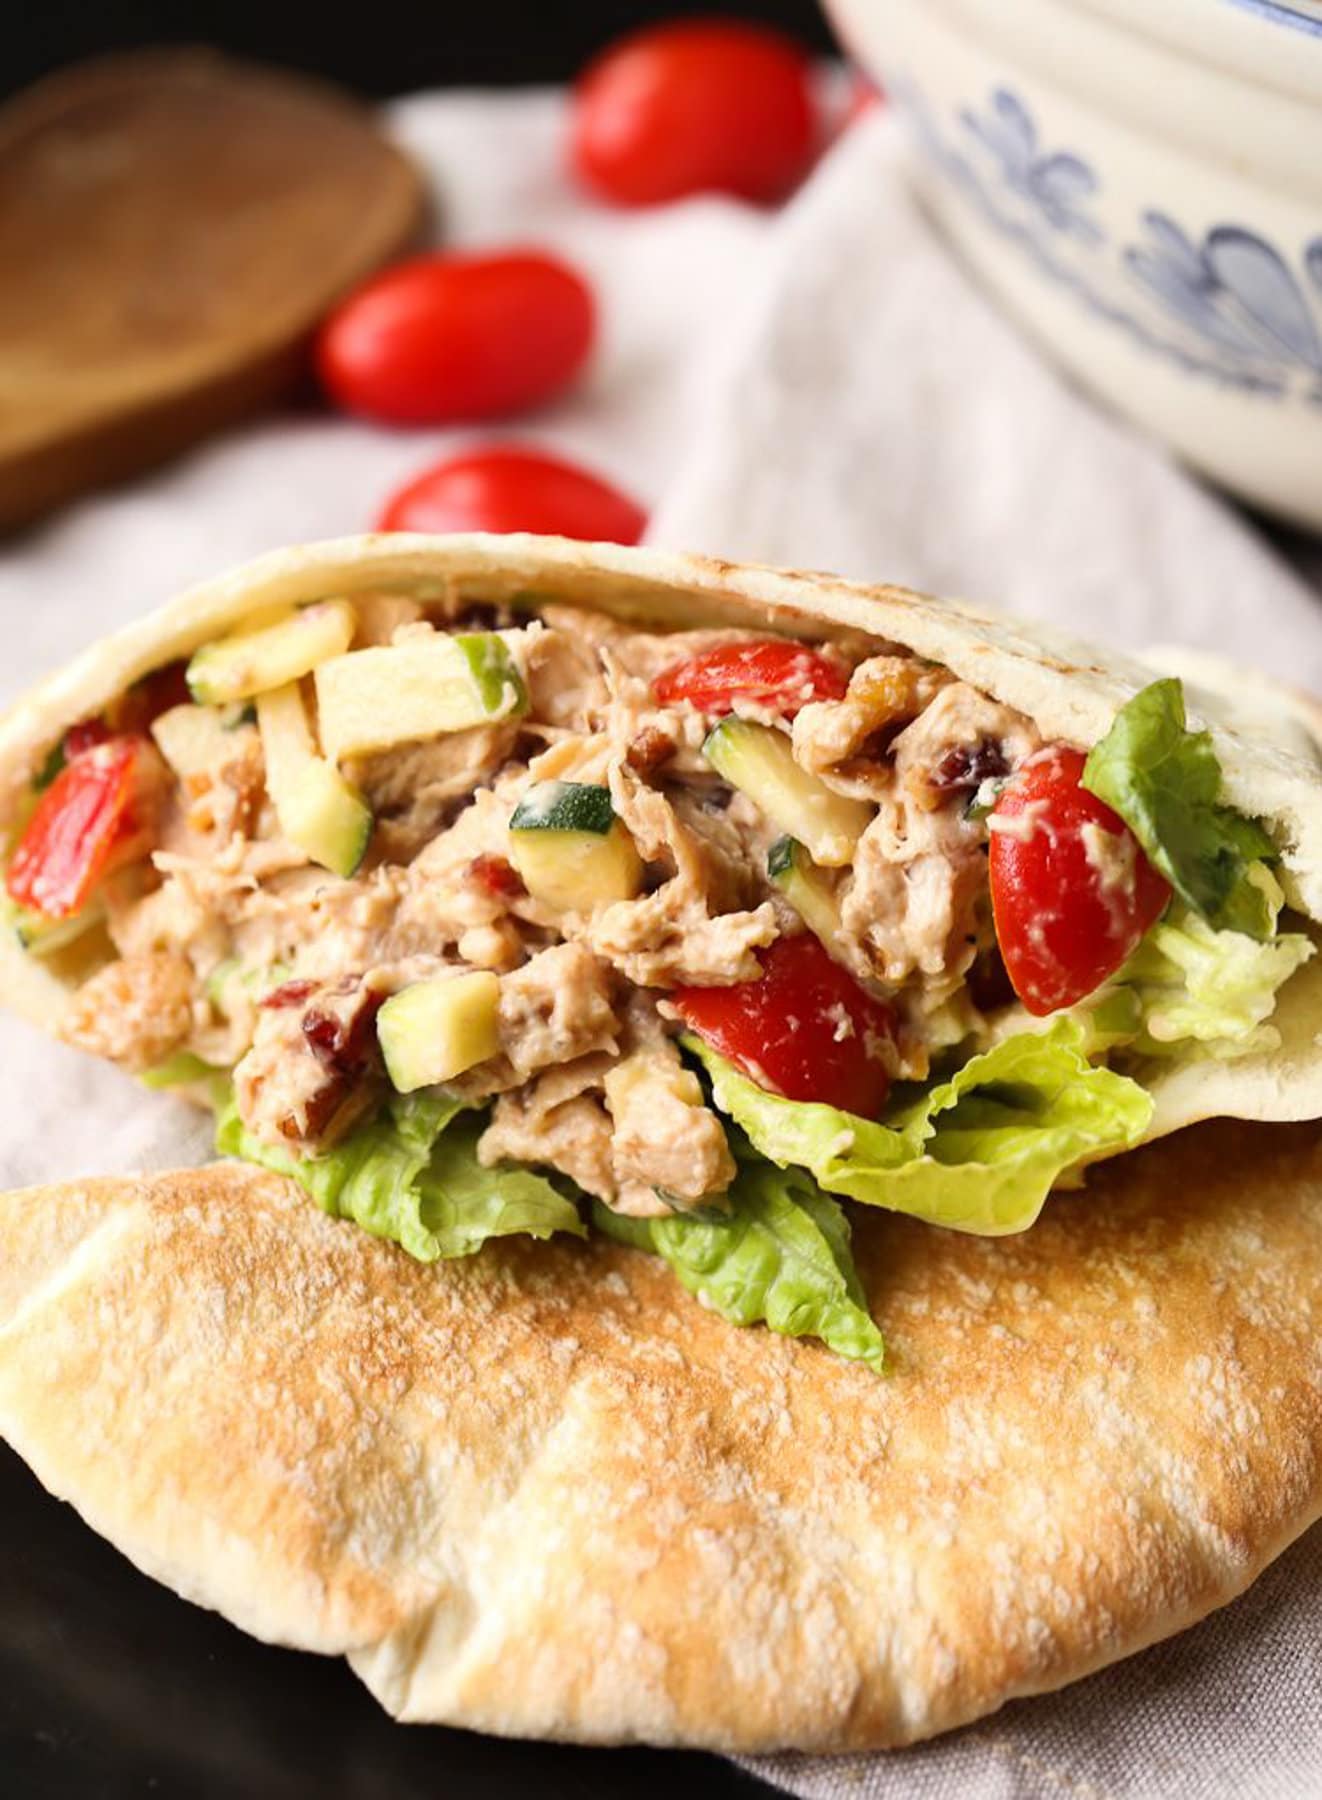 A crunchy chicken salad inside of a piece of pita bread on a table with cherry tomatoes